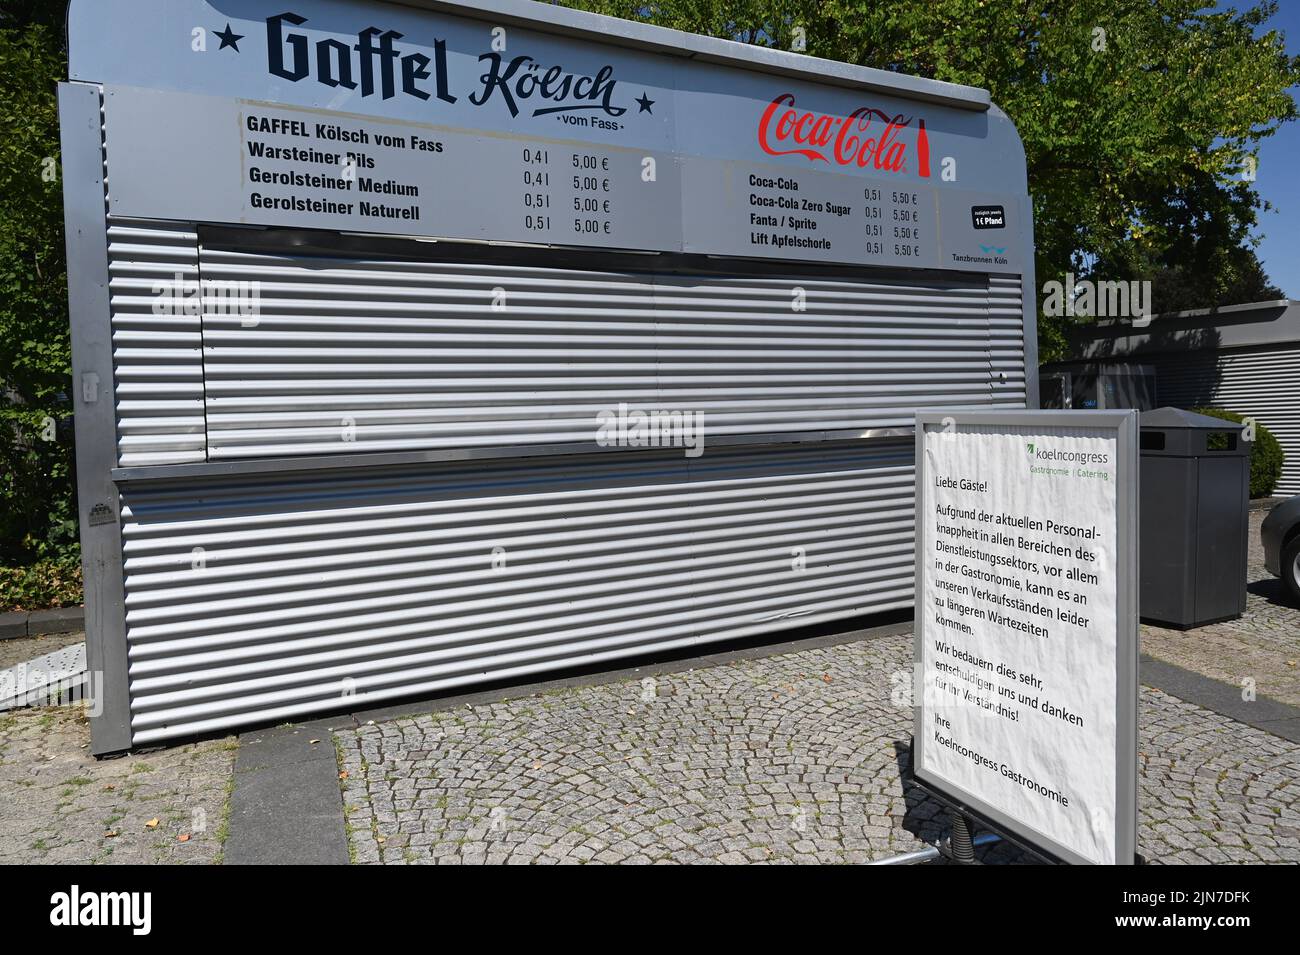 Cologne, Germany. 09th Aug, 2022. A sign at the open air location Cologne Tanzbrunnen indicates that there may be longer waiting times due to staff shortages and staff shortages in the service sector. Credit: Horst Galuschka/dpa/Alamy Live News Stock Photo